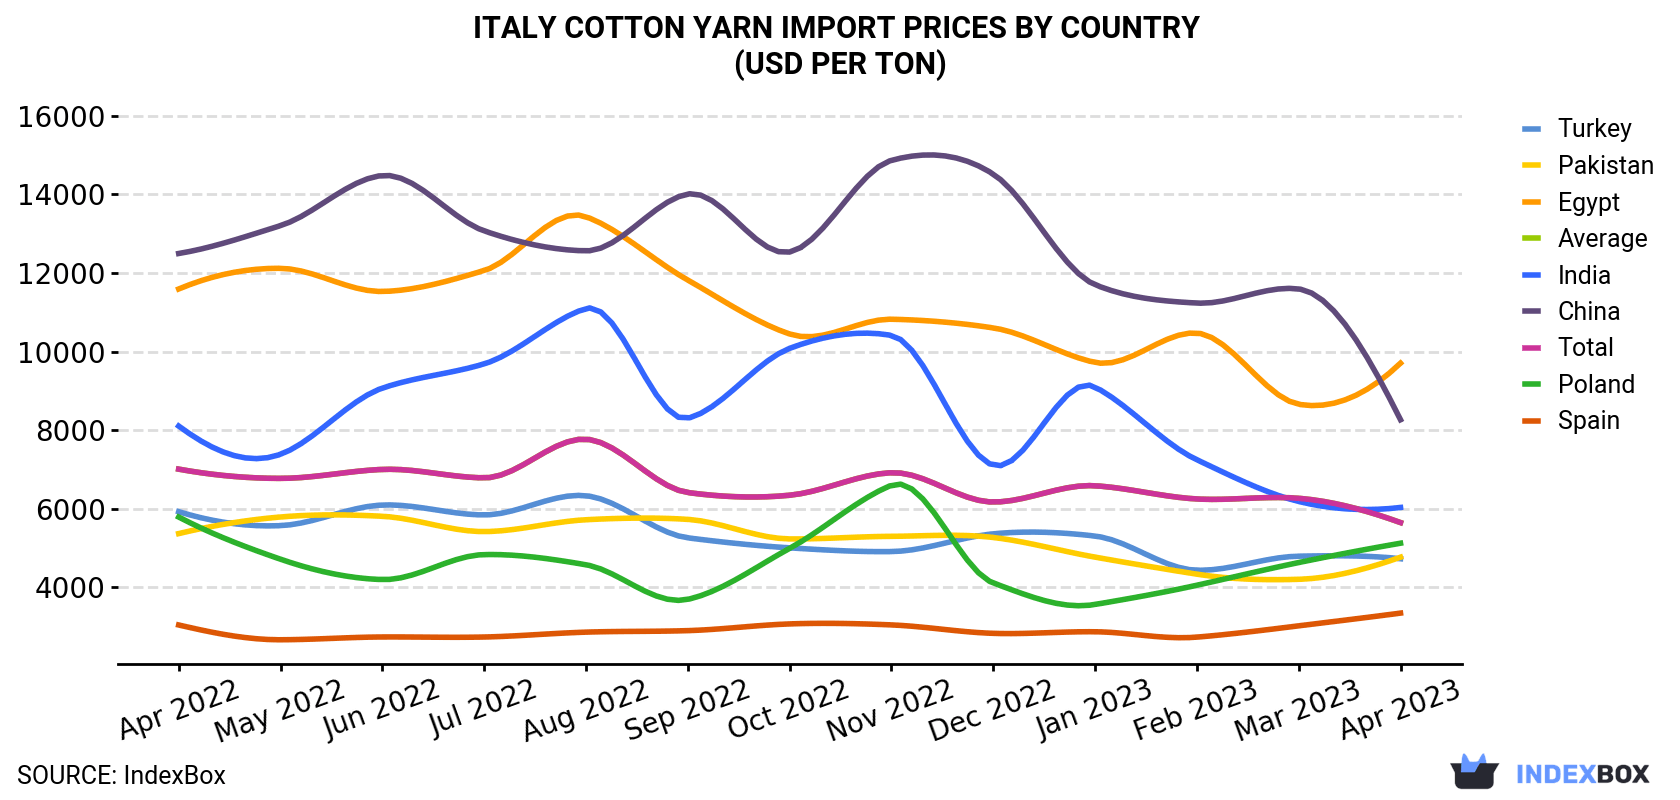 Italy Cotton Yarn Import Prices By Country (USD Per Ton)